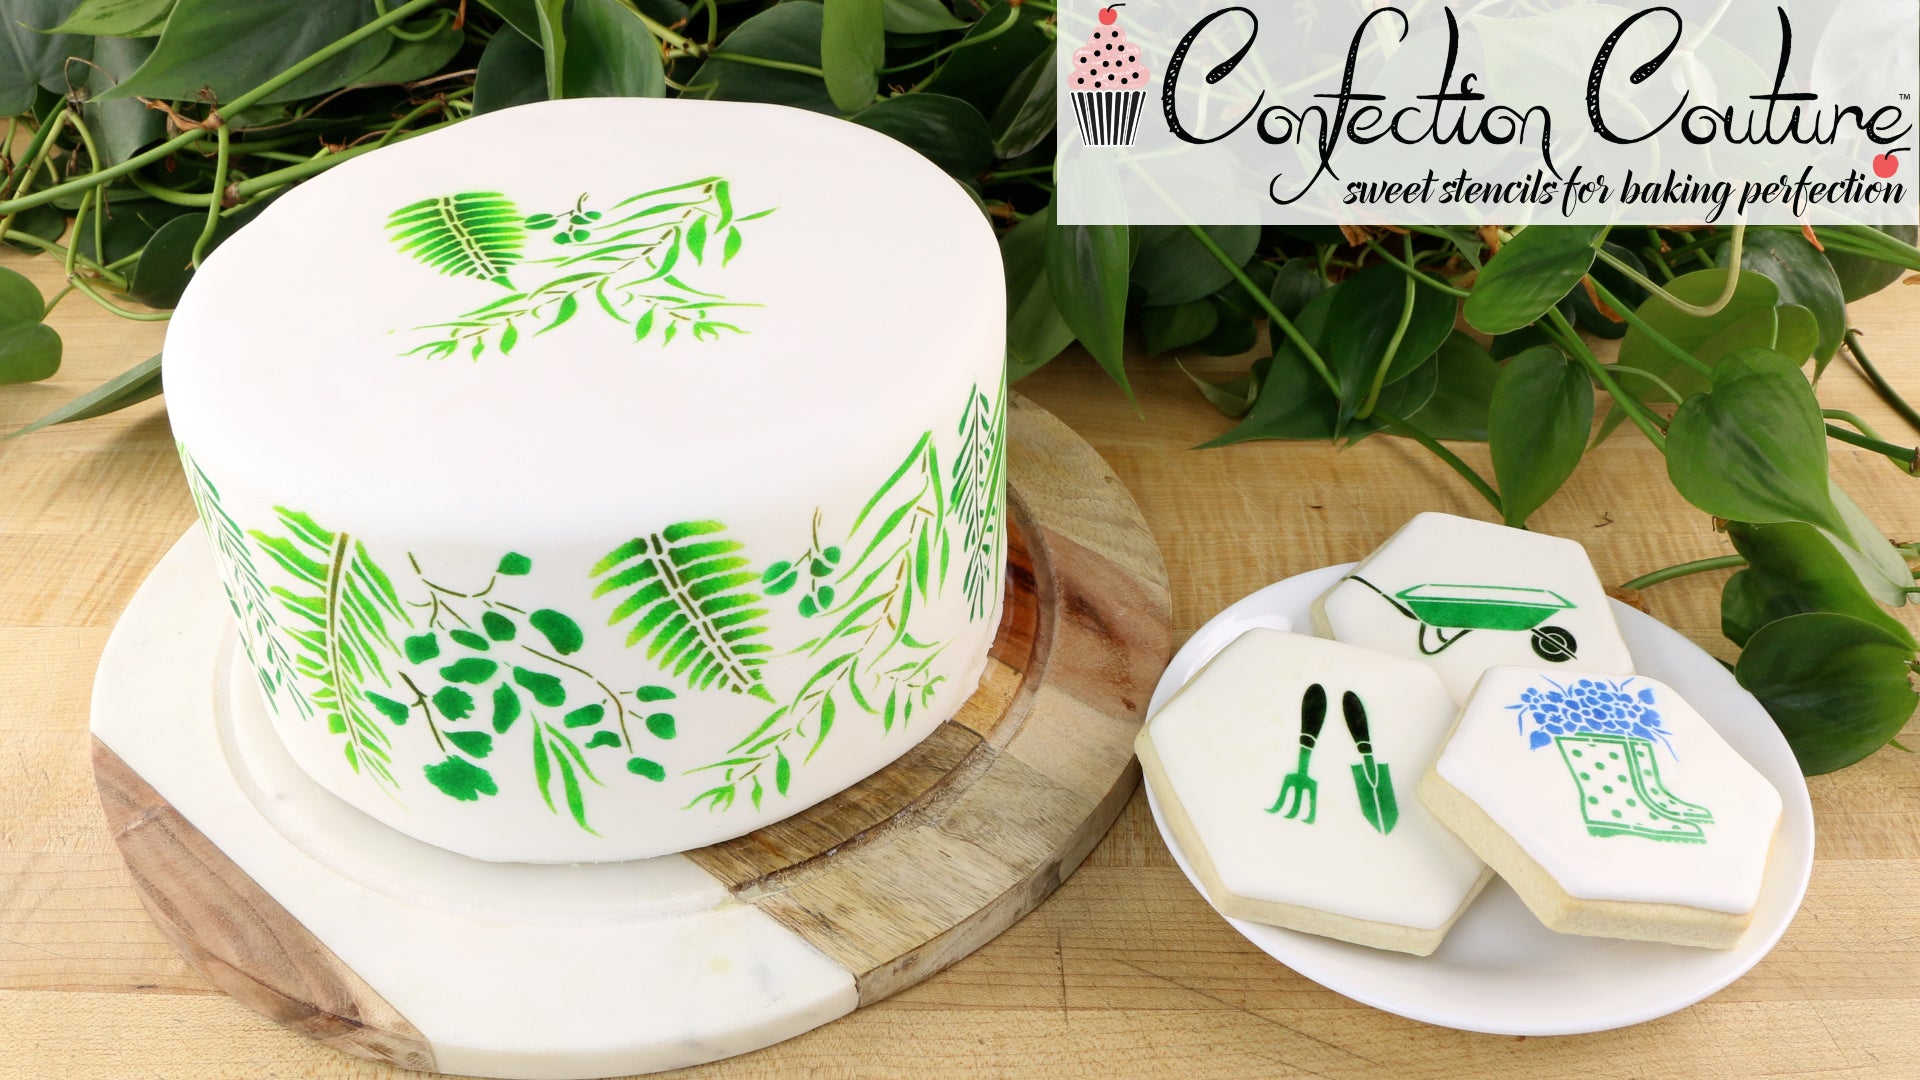 Autumn Leaves Brush Embroidery Cake - My Cake School